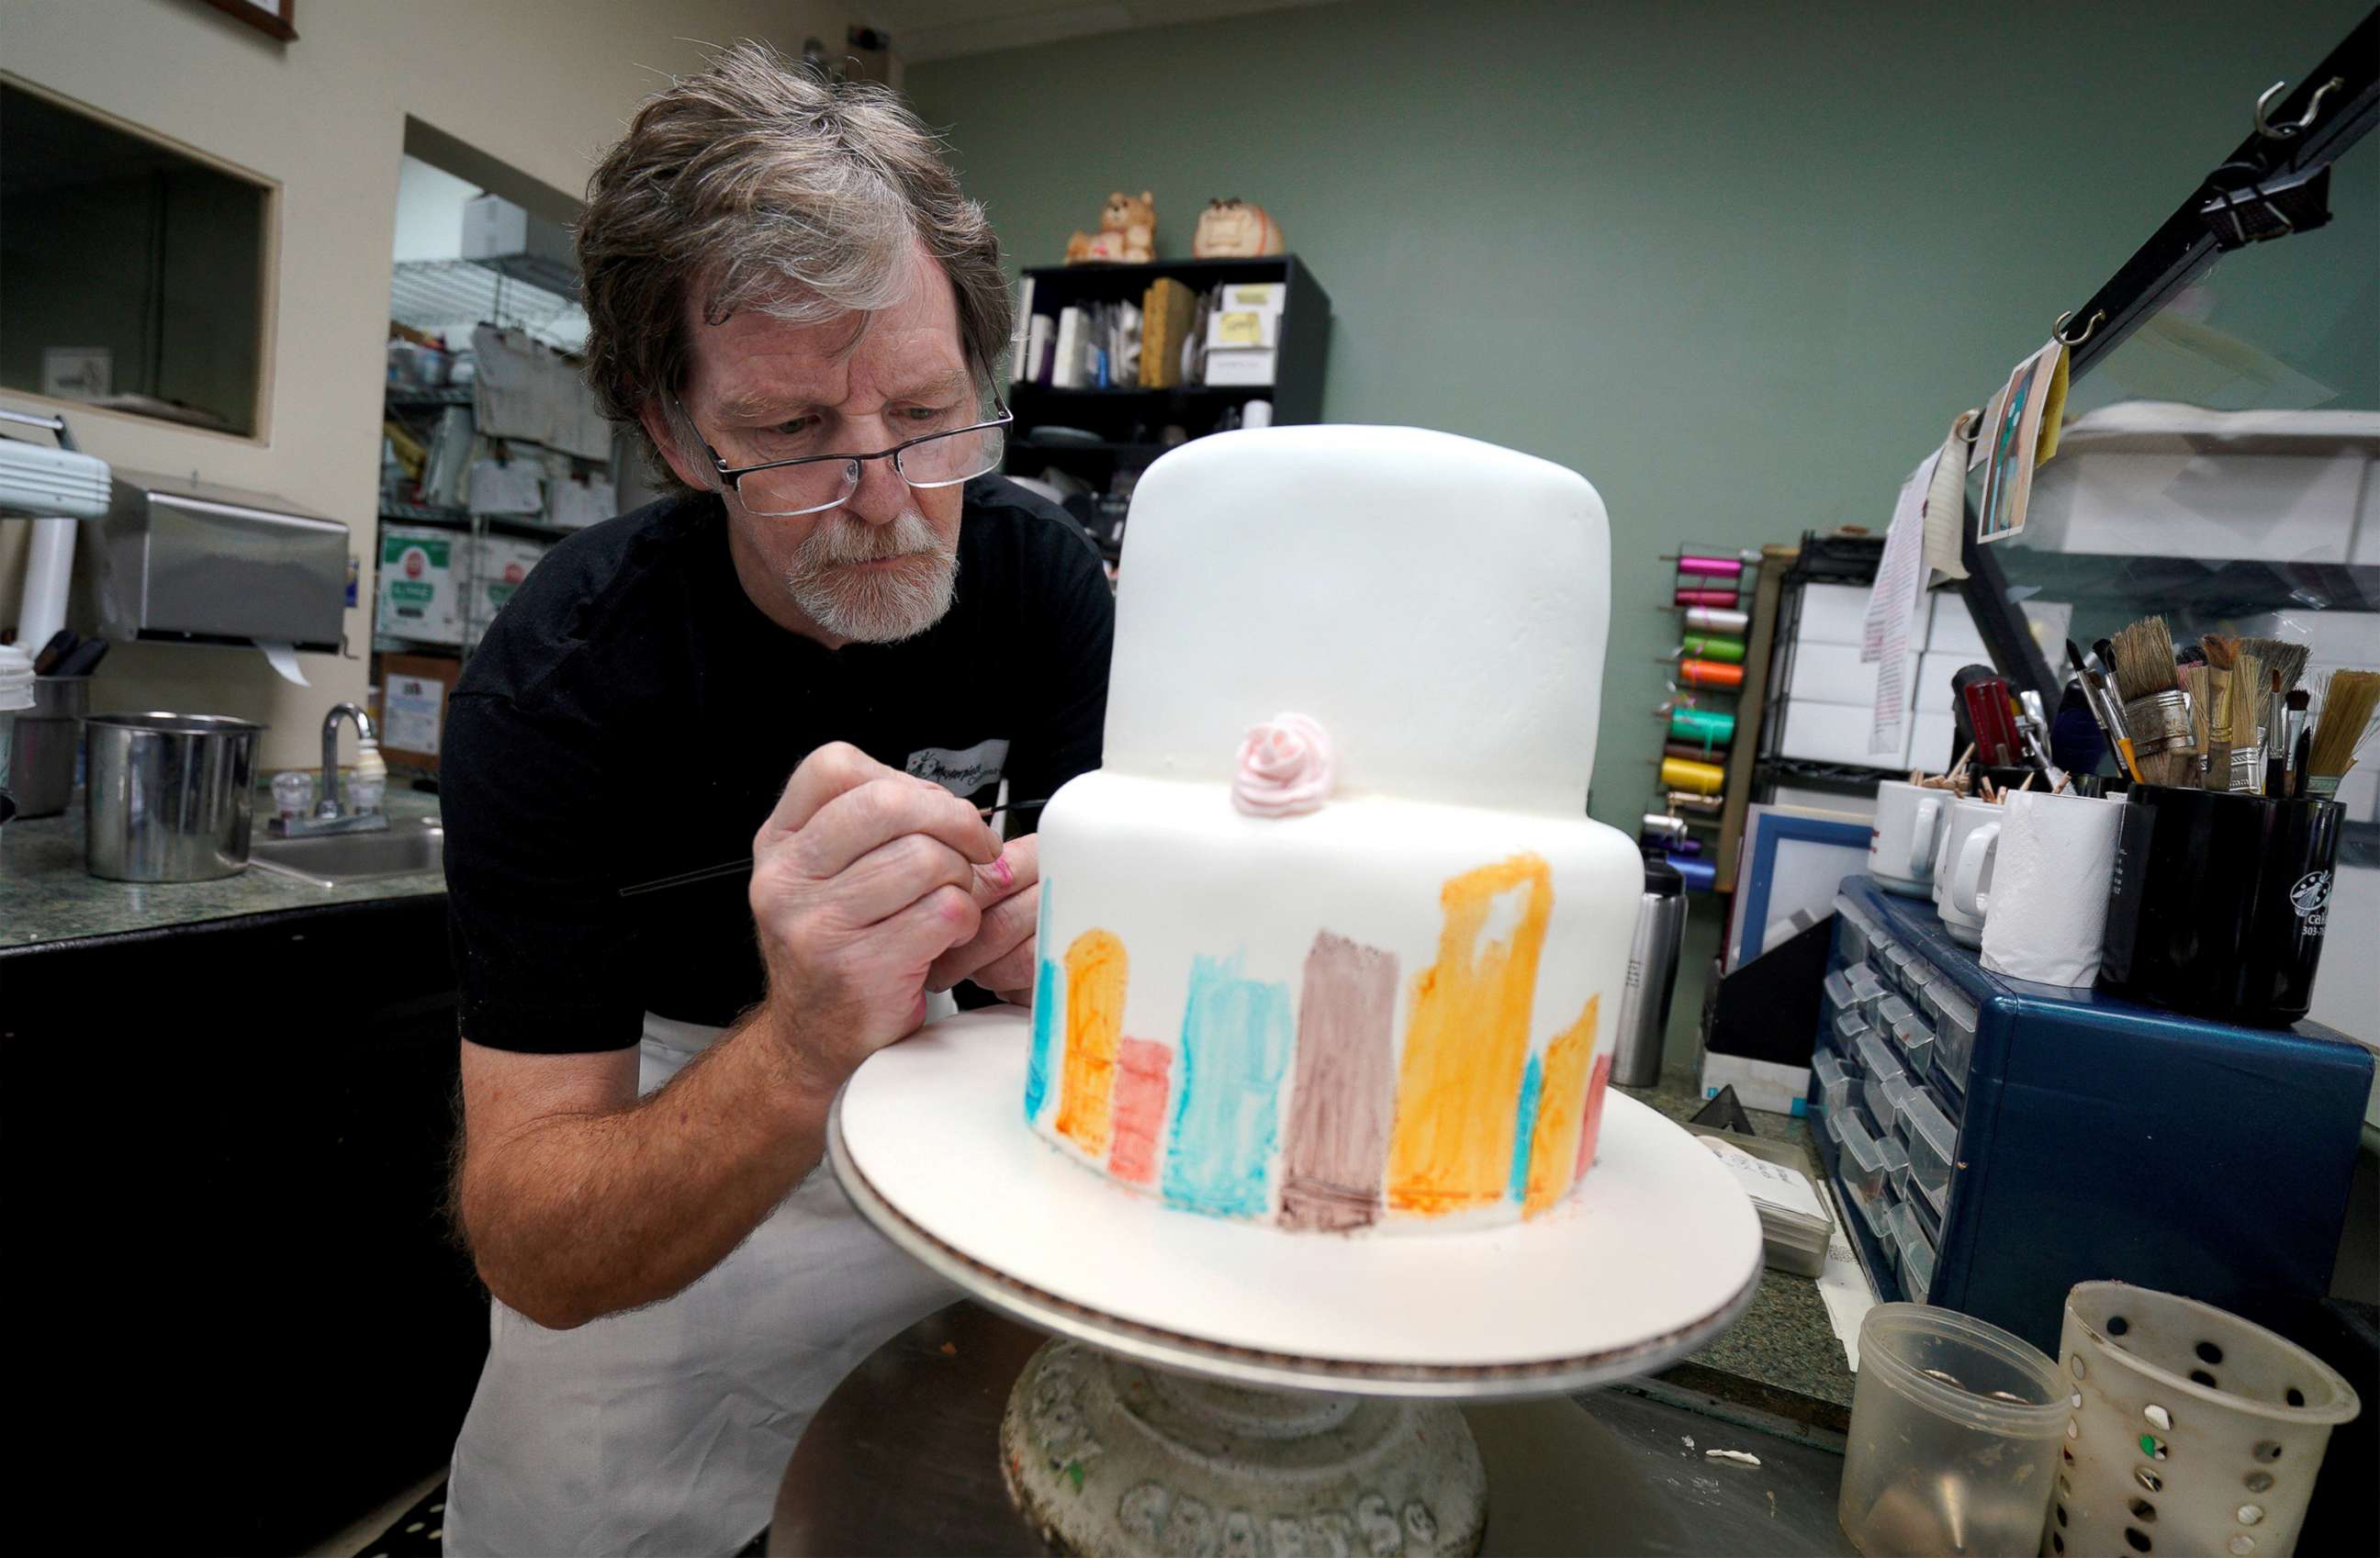 PHOTO: Baker Jack Phillips decorates a cake in his Masterpiece Cakeshop in Lakewood, Colo., on Sept. 21, 2017.